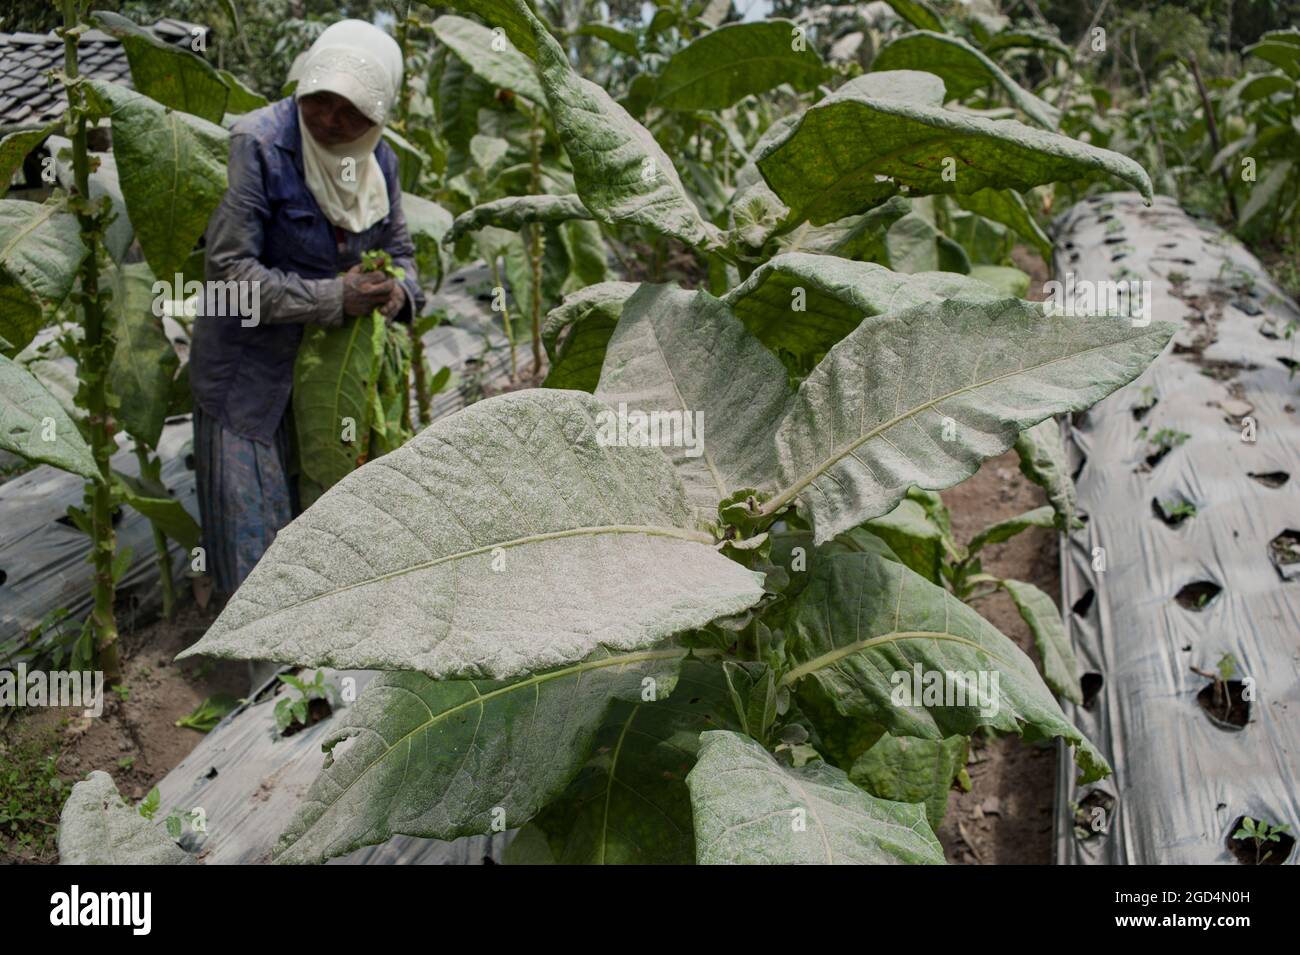 Central Java, Indonesia. 11th Aug, 2021. A woman picks up tobacco leaves covered by volcanic ash from Mount Merapi after eruption at her tobacco plantation in Tlogolele village of Central Java, Indonesia, Aug. 11, 2021. Credit: Supriyanto/Xinhua/Alamy Live News Stock Photo